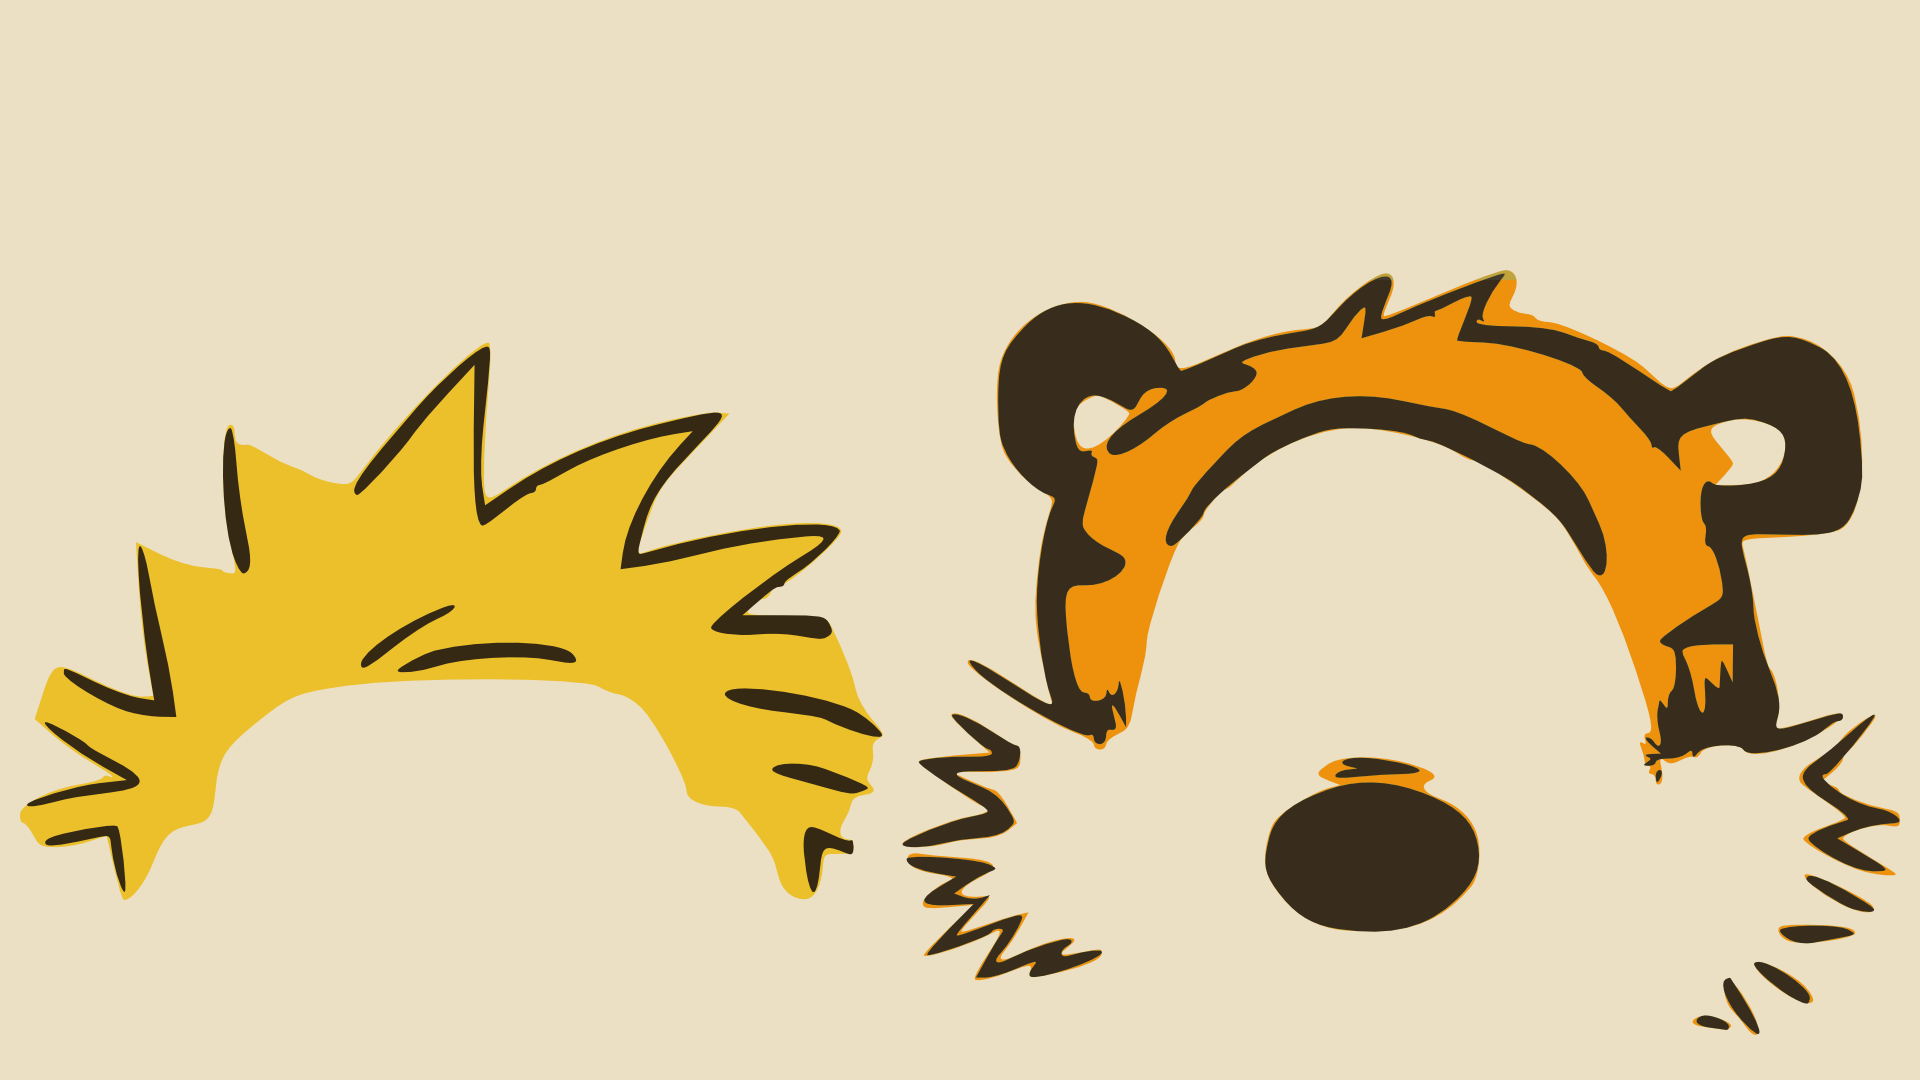 Minimal Calvin and Hobbes [1920x1080] : wallpapers